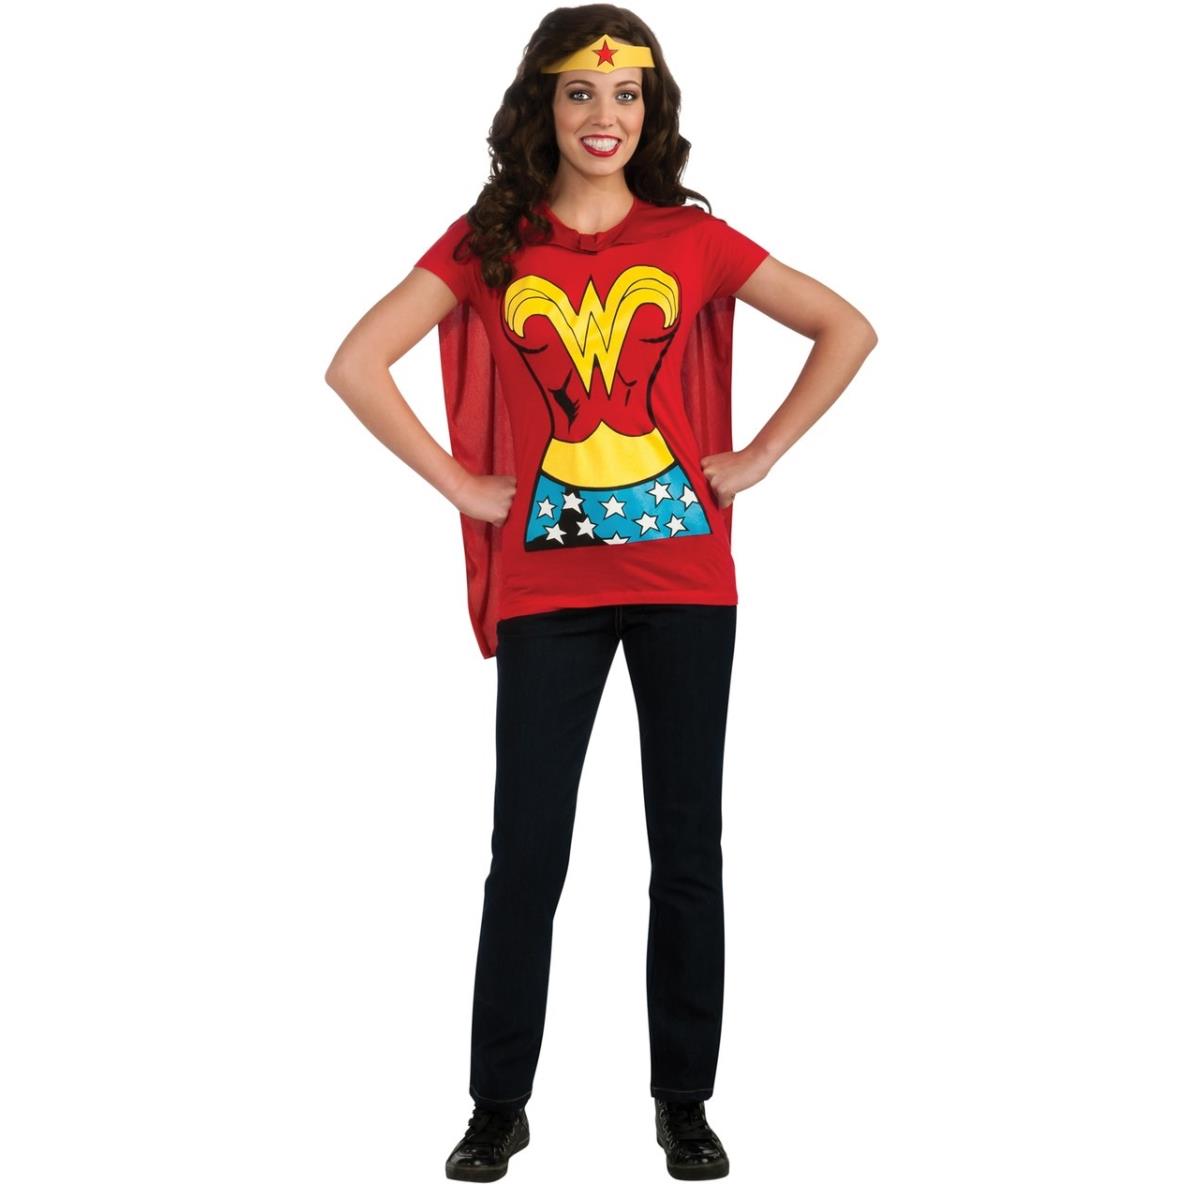 Picture of BuySeasons 283591 Wonder Woman T-Shirt Adult Costume Kit, Extra Small